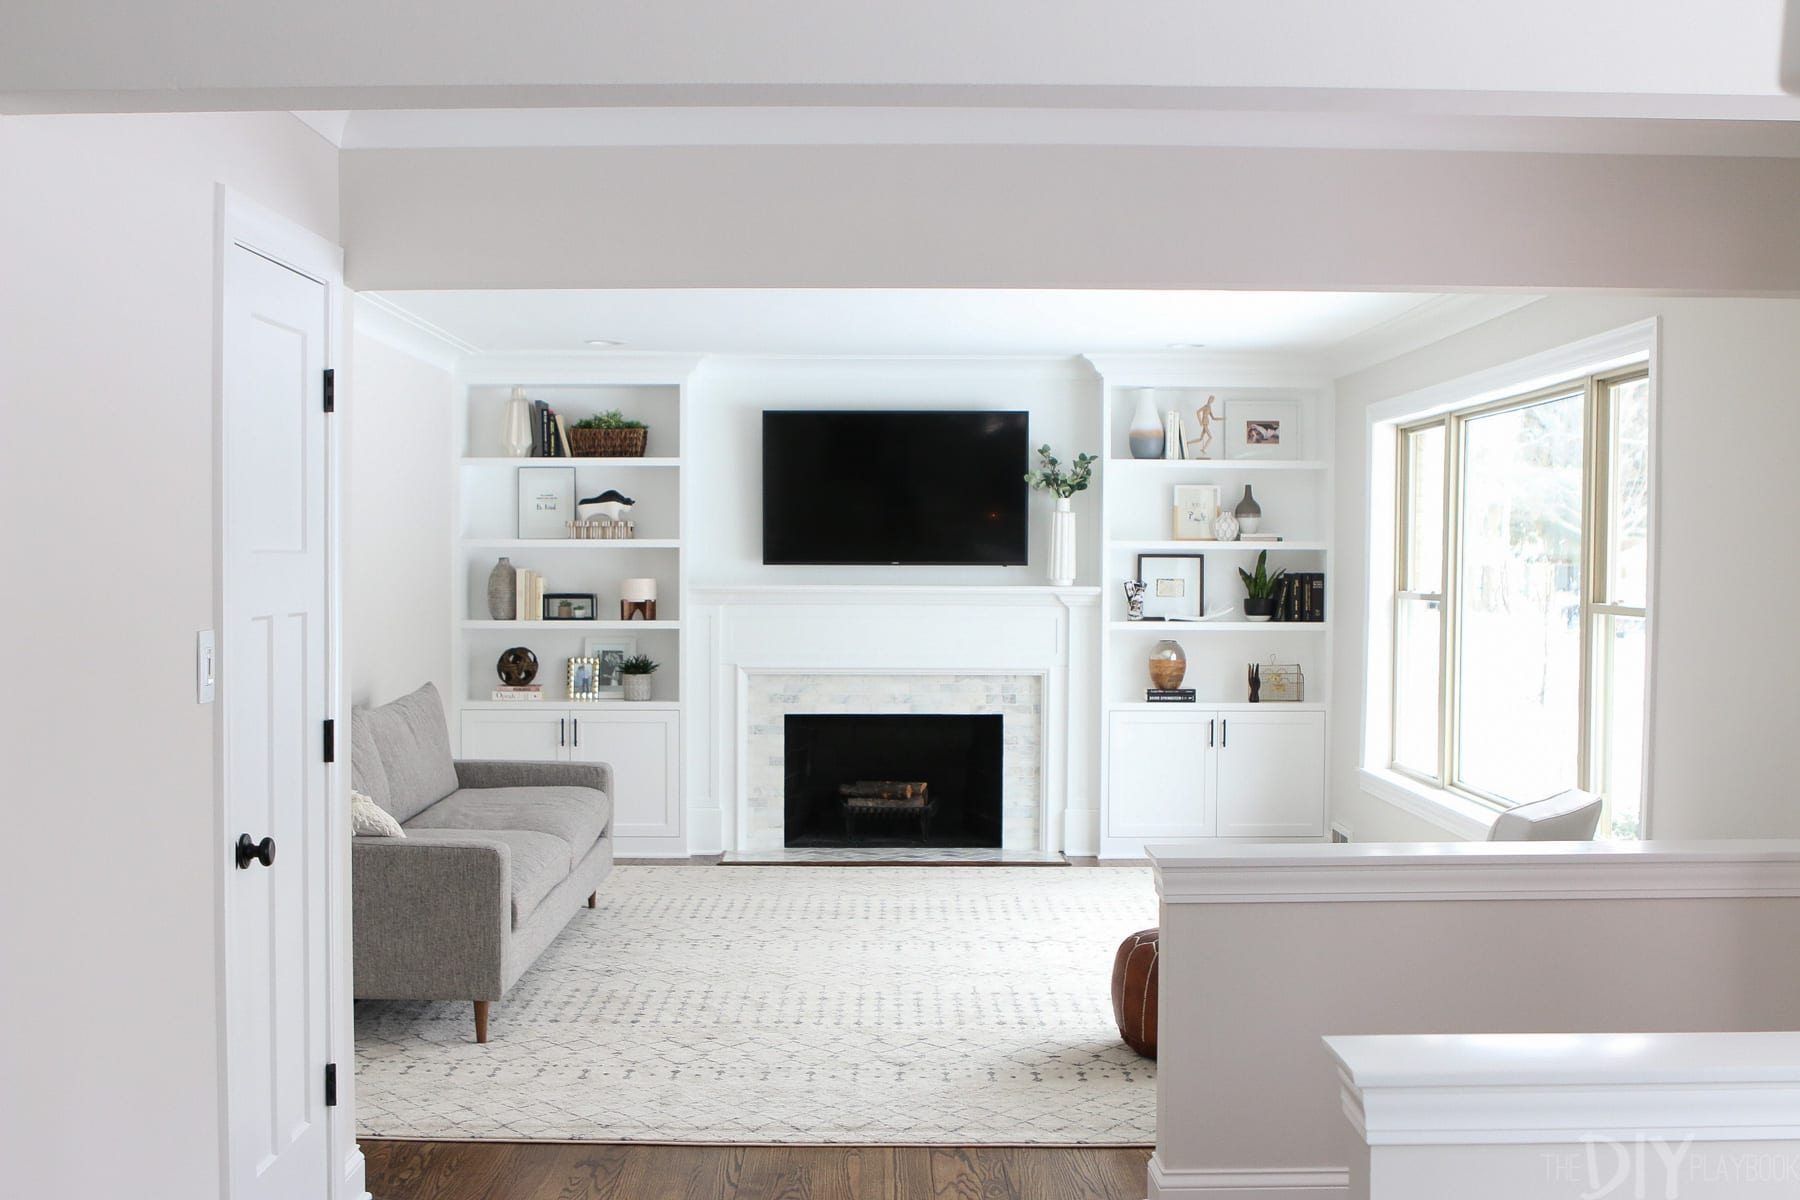 White Built Ins Around The Fireplace, Built In Bookcase Fireplace Plans